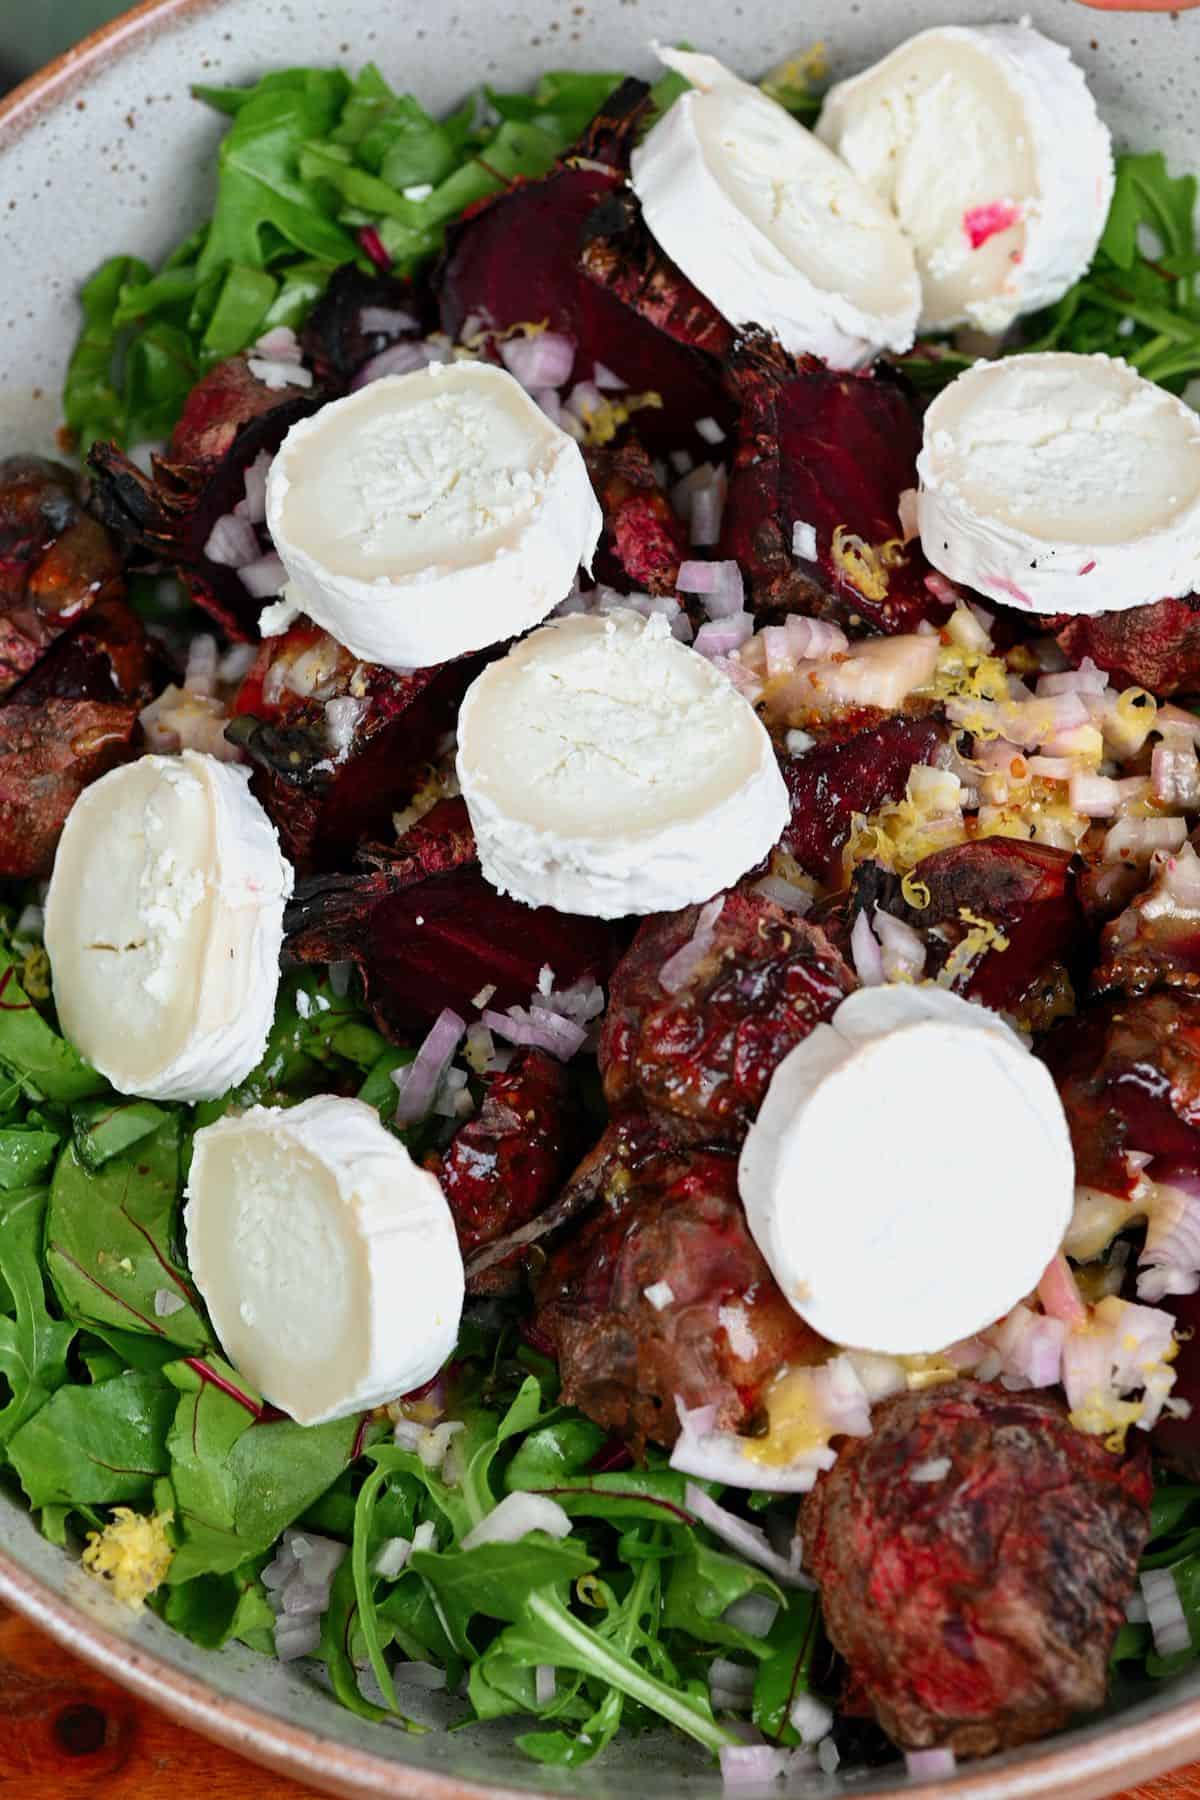 https://www.alphafoodie.com/wp-content/uploads/2021/06/Beetroot-Salad-Beetroot-salad-with-goat-cheese-in-a-bowl.jpeg